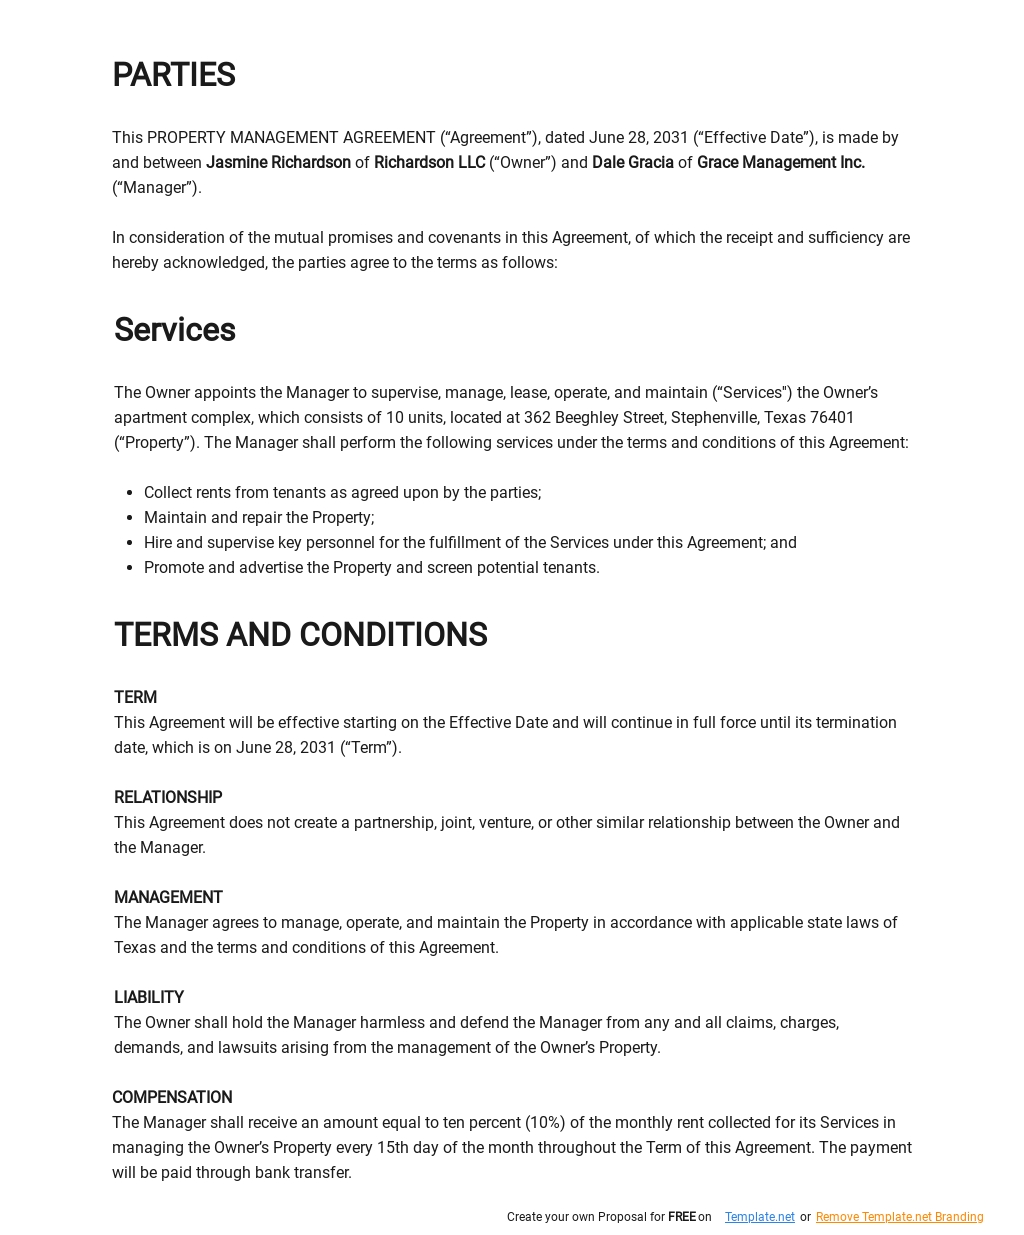 Residential Property Management Agreement Template 1.jpe